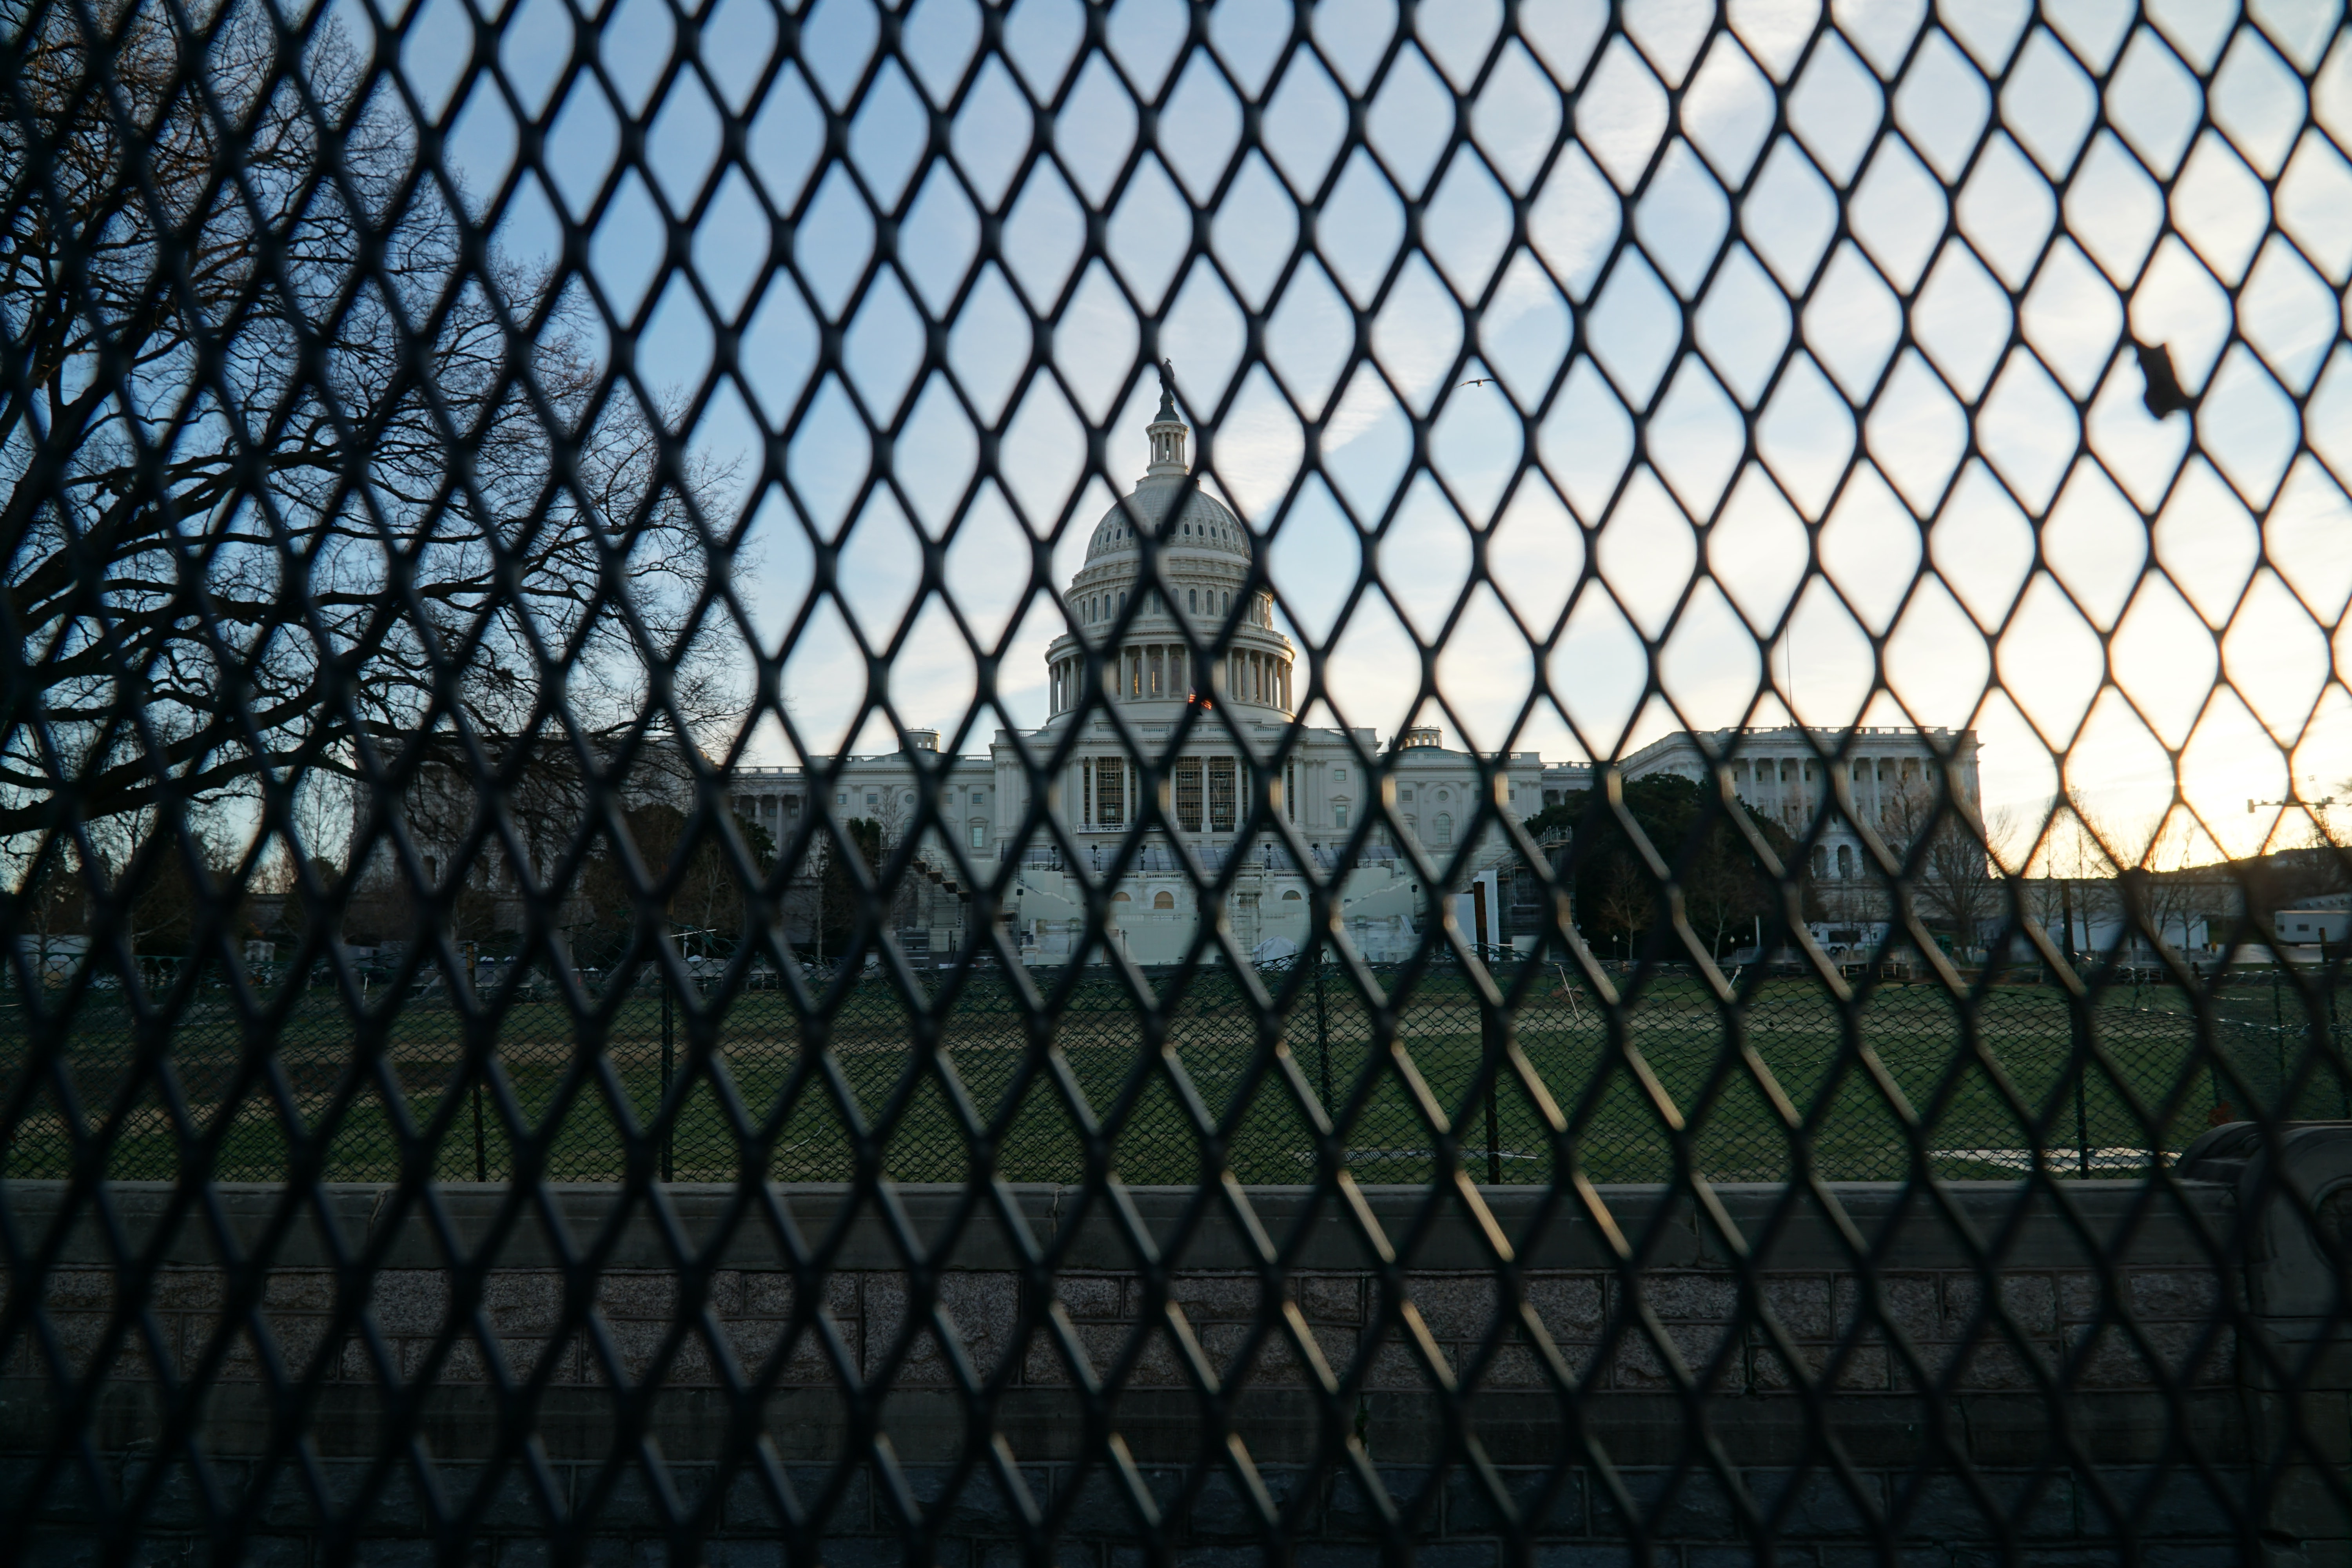 capitol building behind a fence